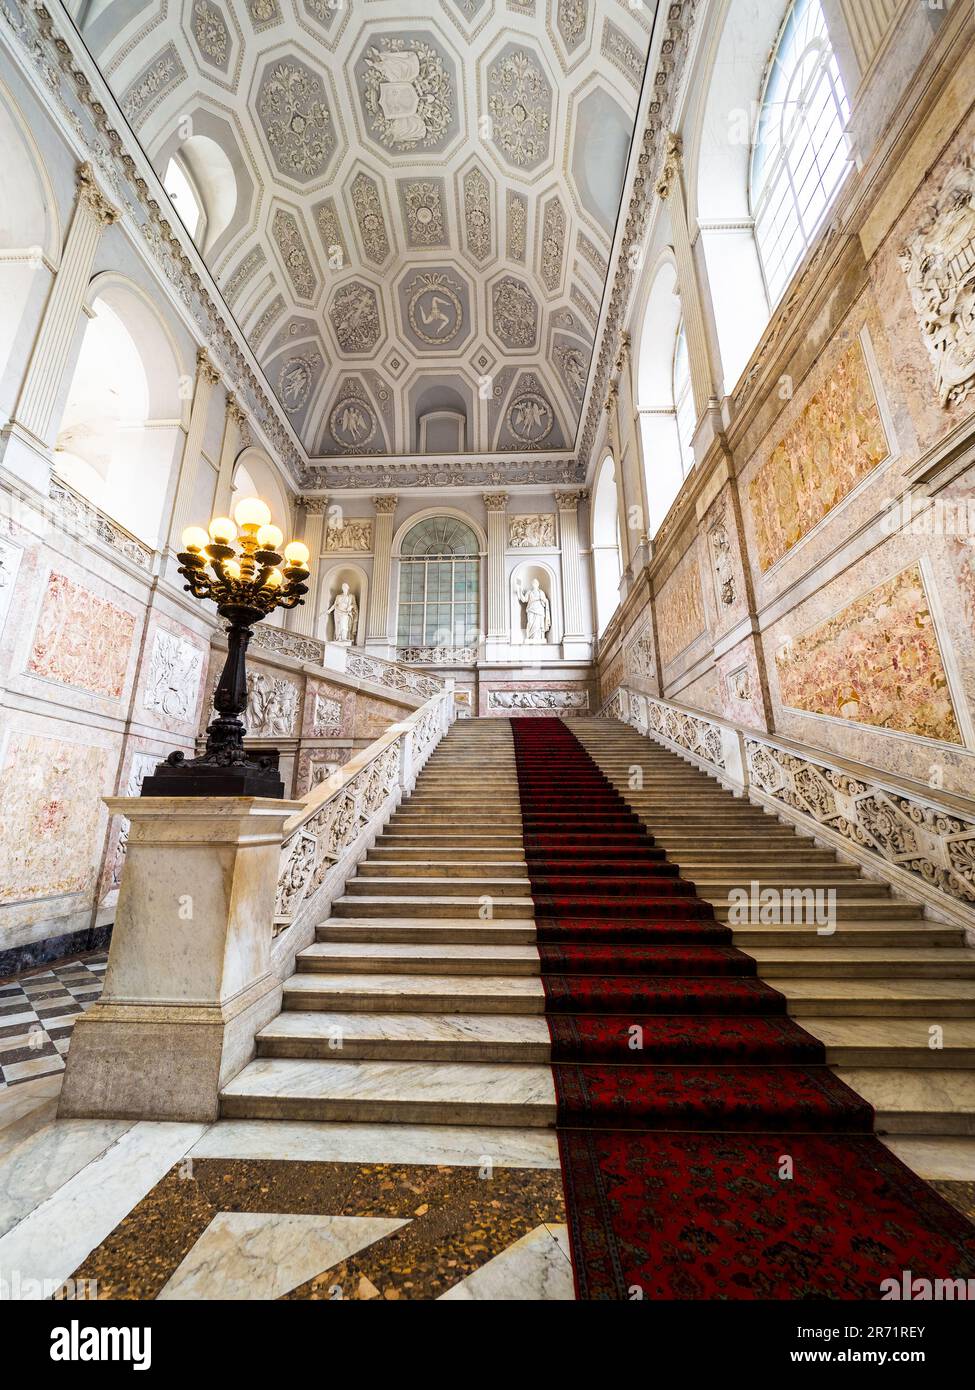 Rose marble walls of the great staircase designed by the architect Gaetano Genovese in 1837 in the Royal Palace of Naples that In 1734 became the royal residence of the Bourbons - Naples, Italy Stock Photo